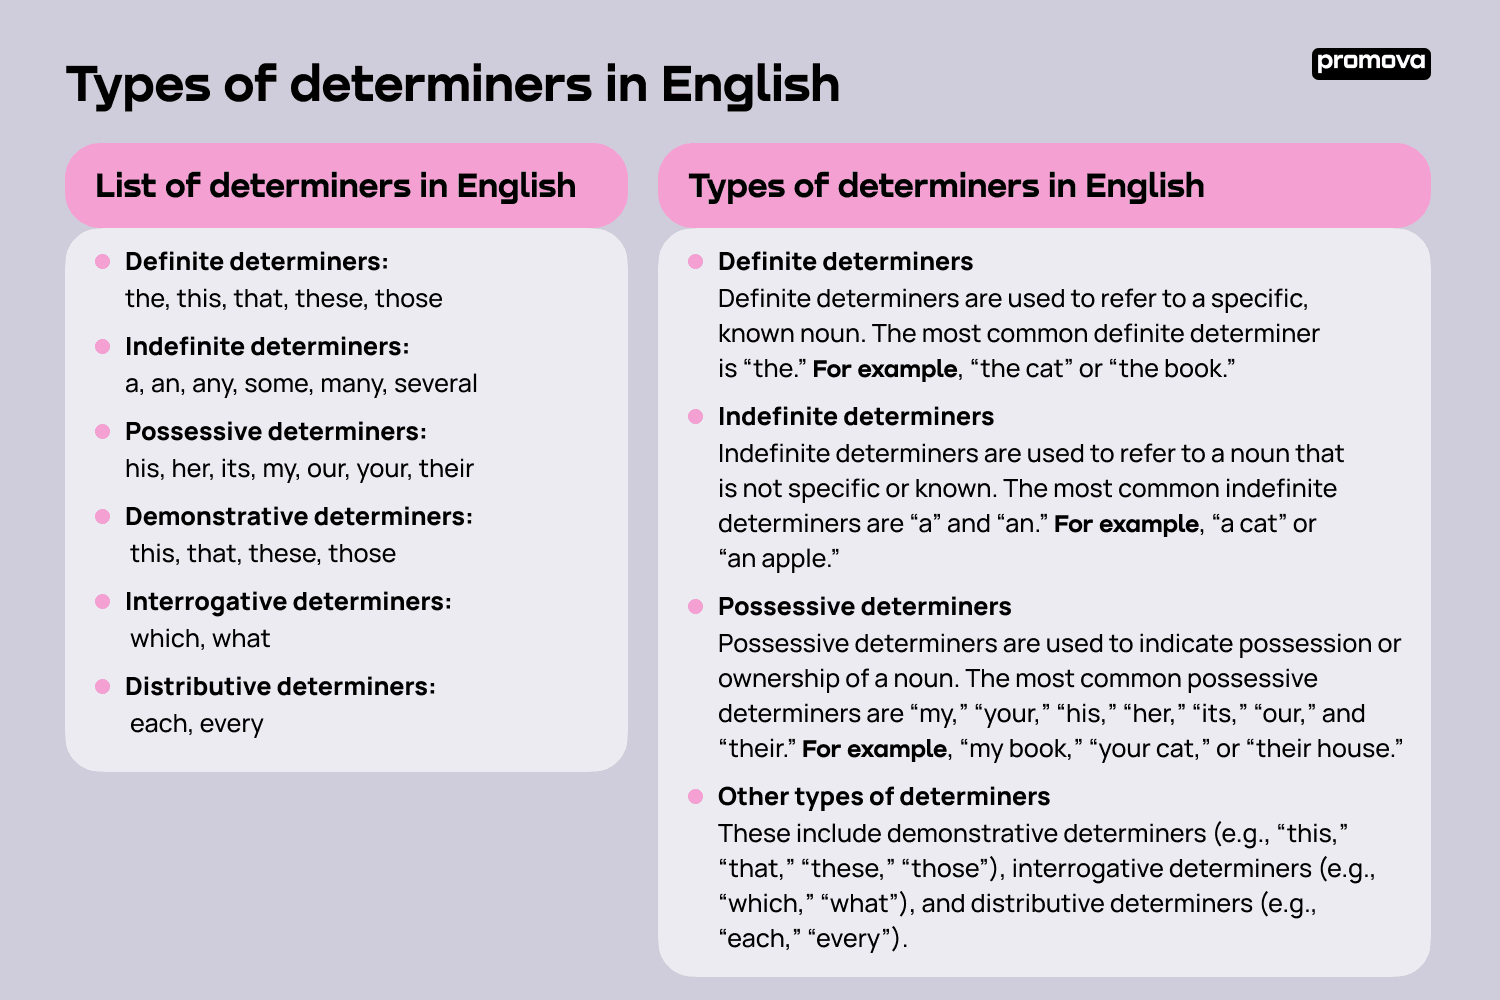 List of determiners in English